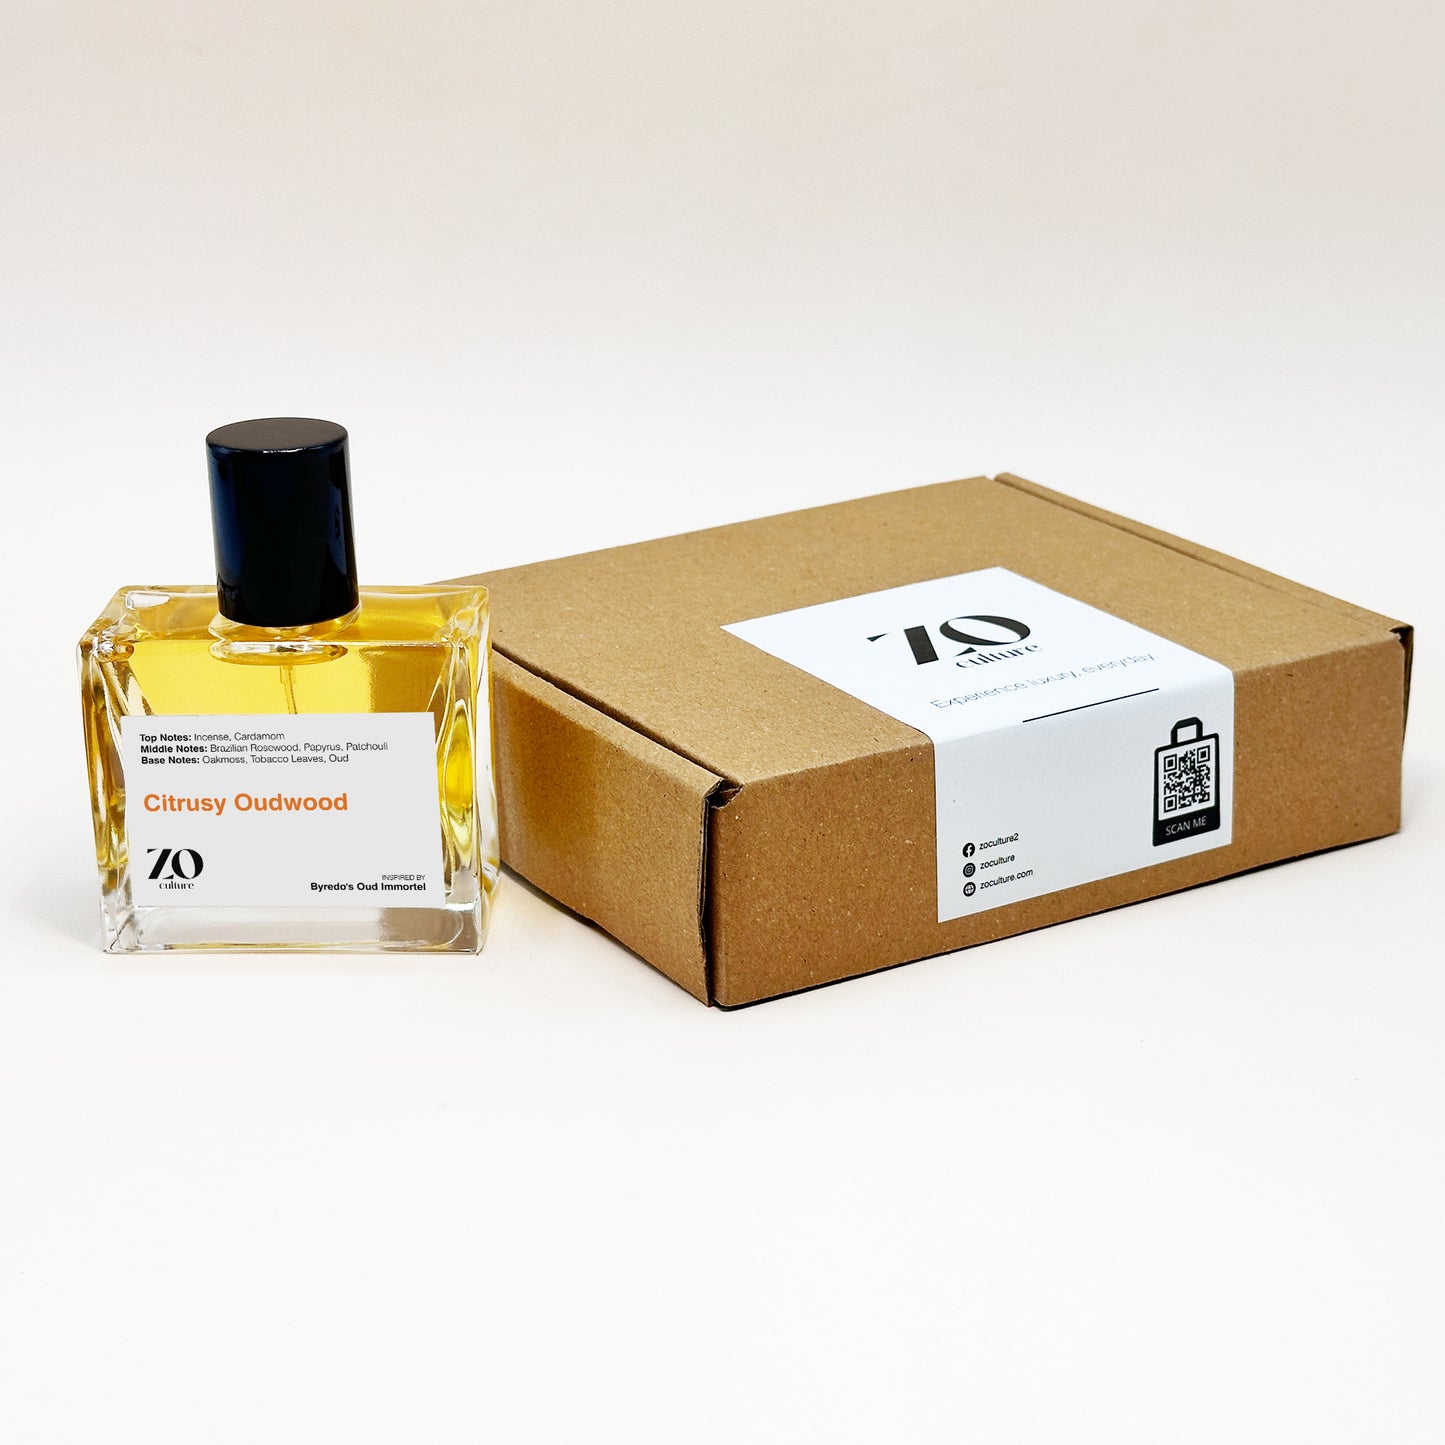 Unisex Citrusy Oudwood - Inspired by Byredo's Oud Immortel ZoCulture